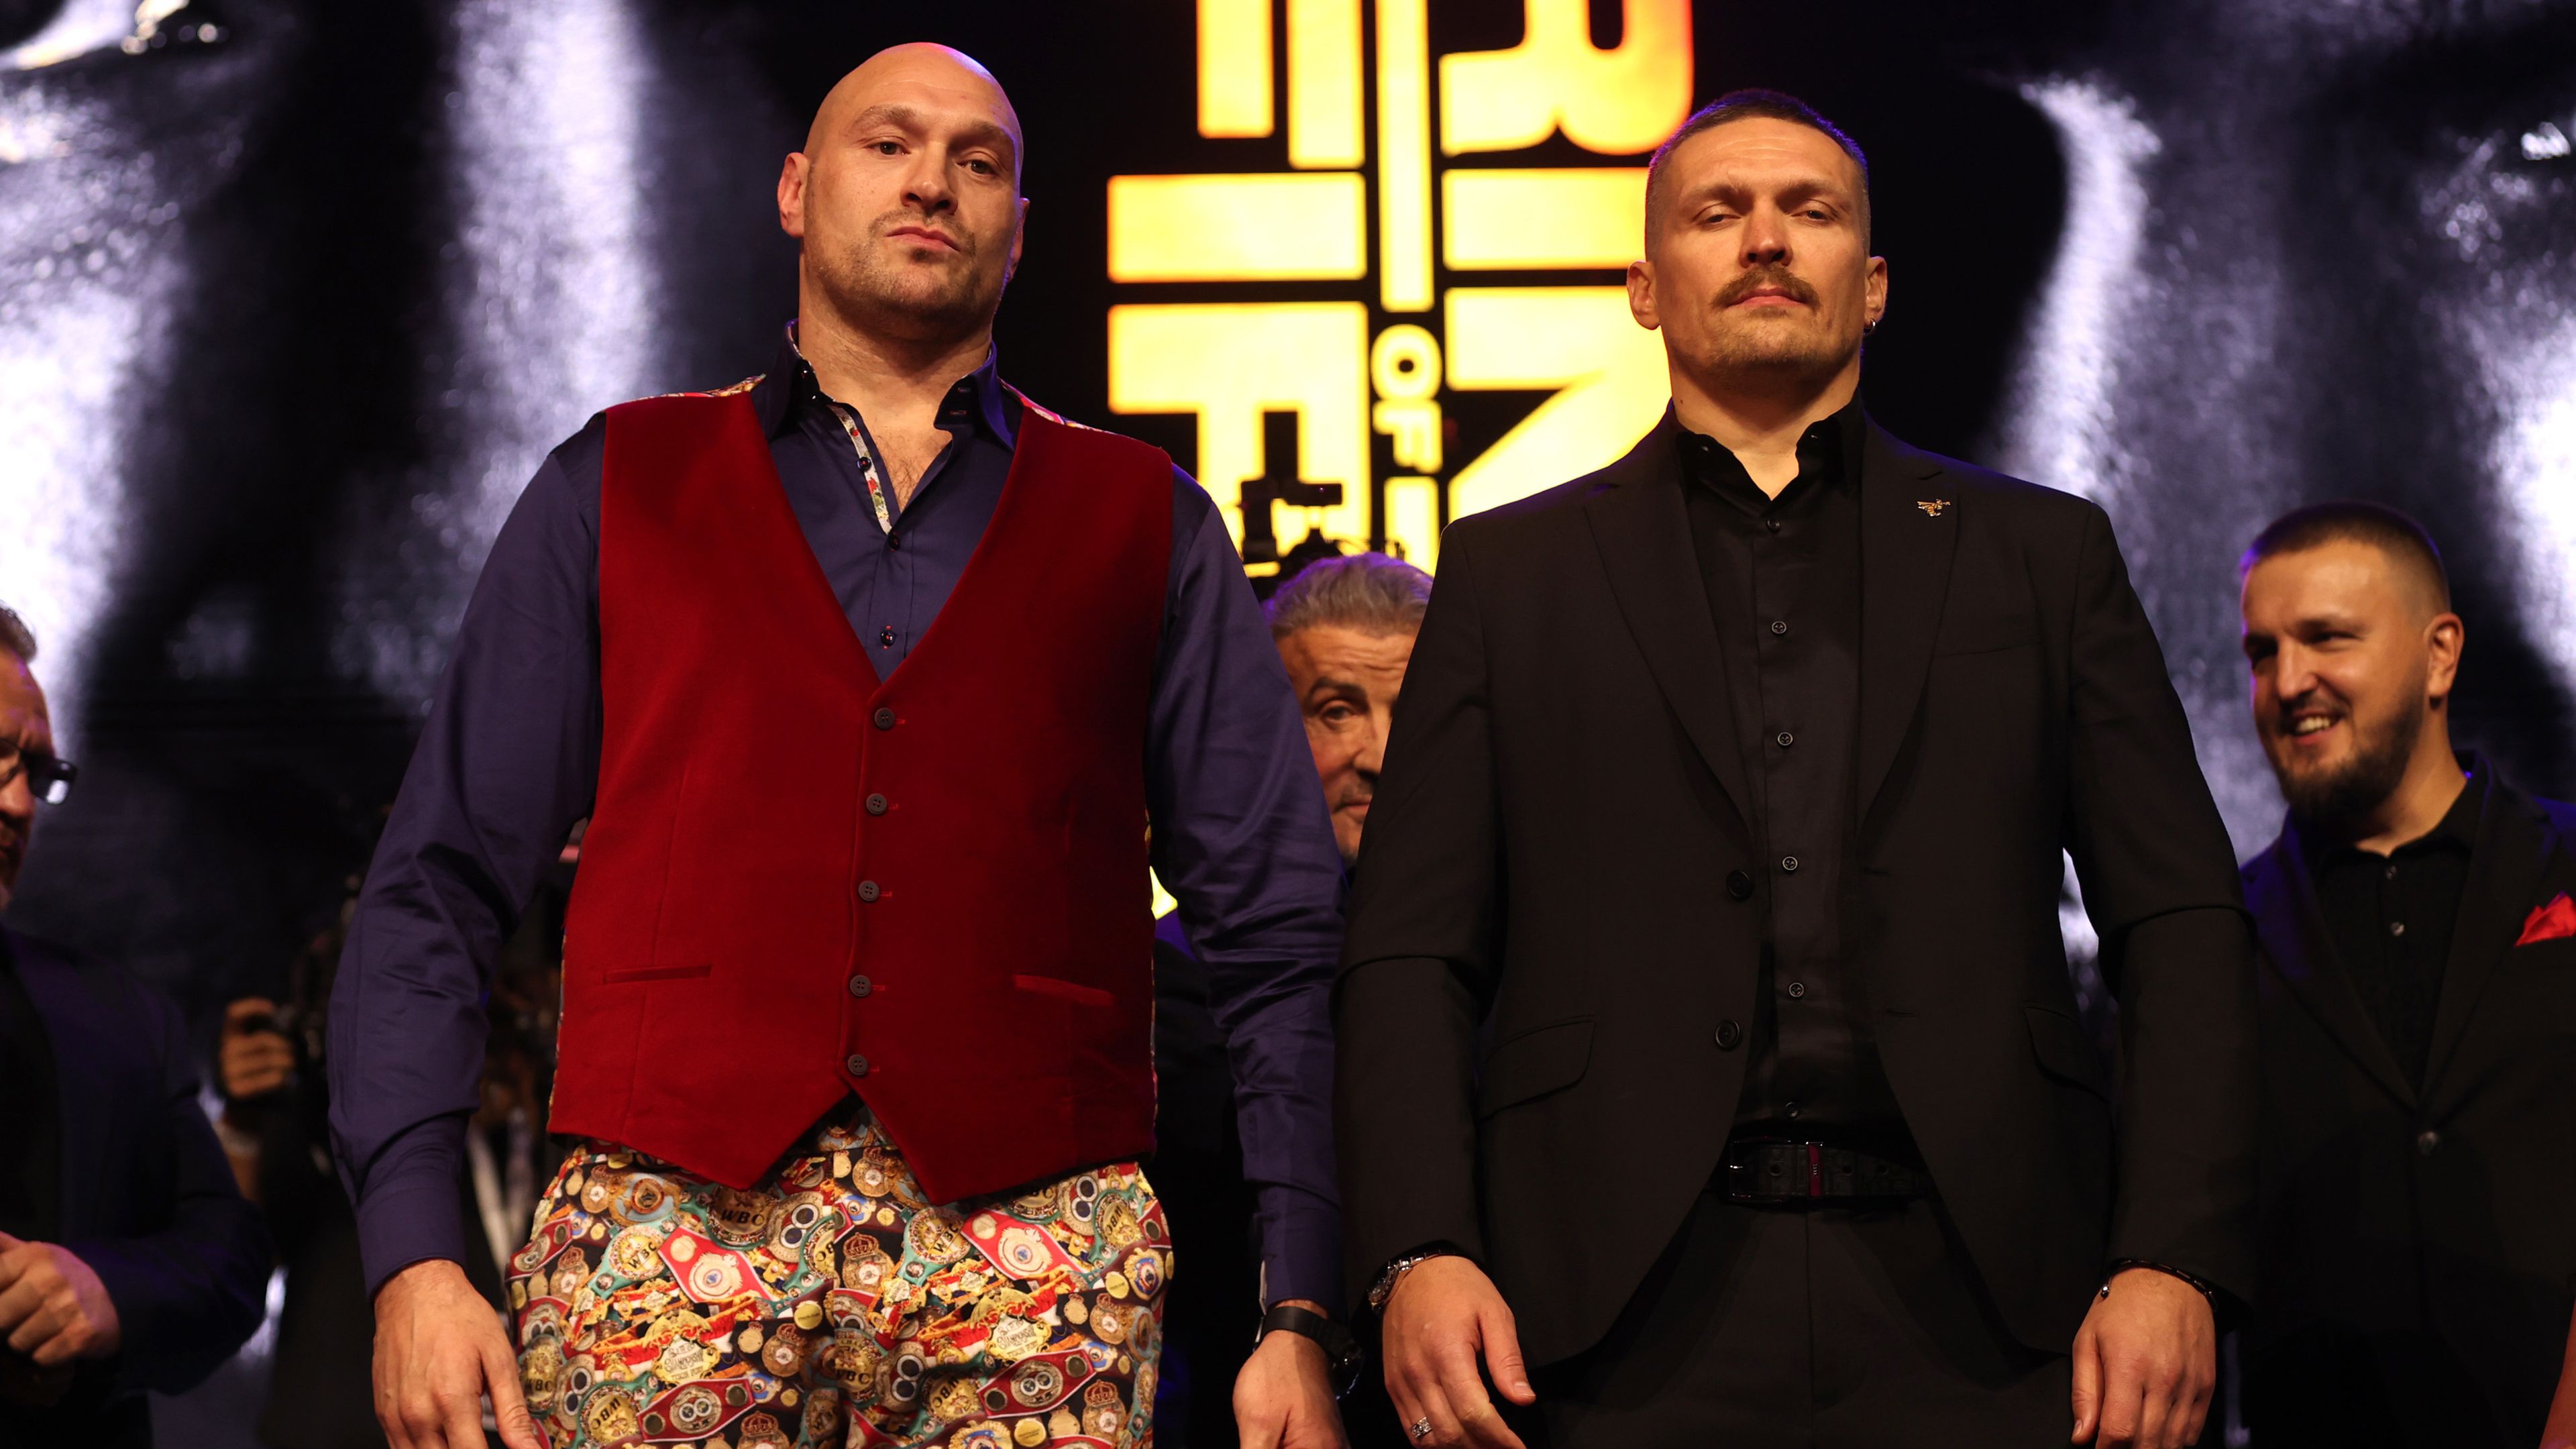 'First time for everything': Tyson Fury world title bout rescheduled after gruesome eye injury